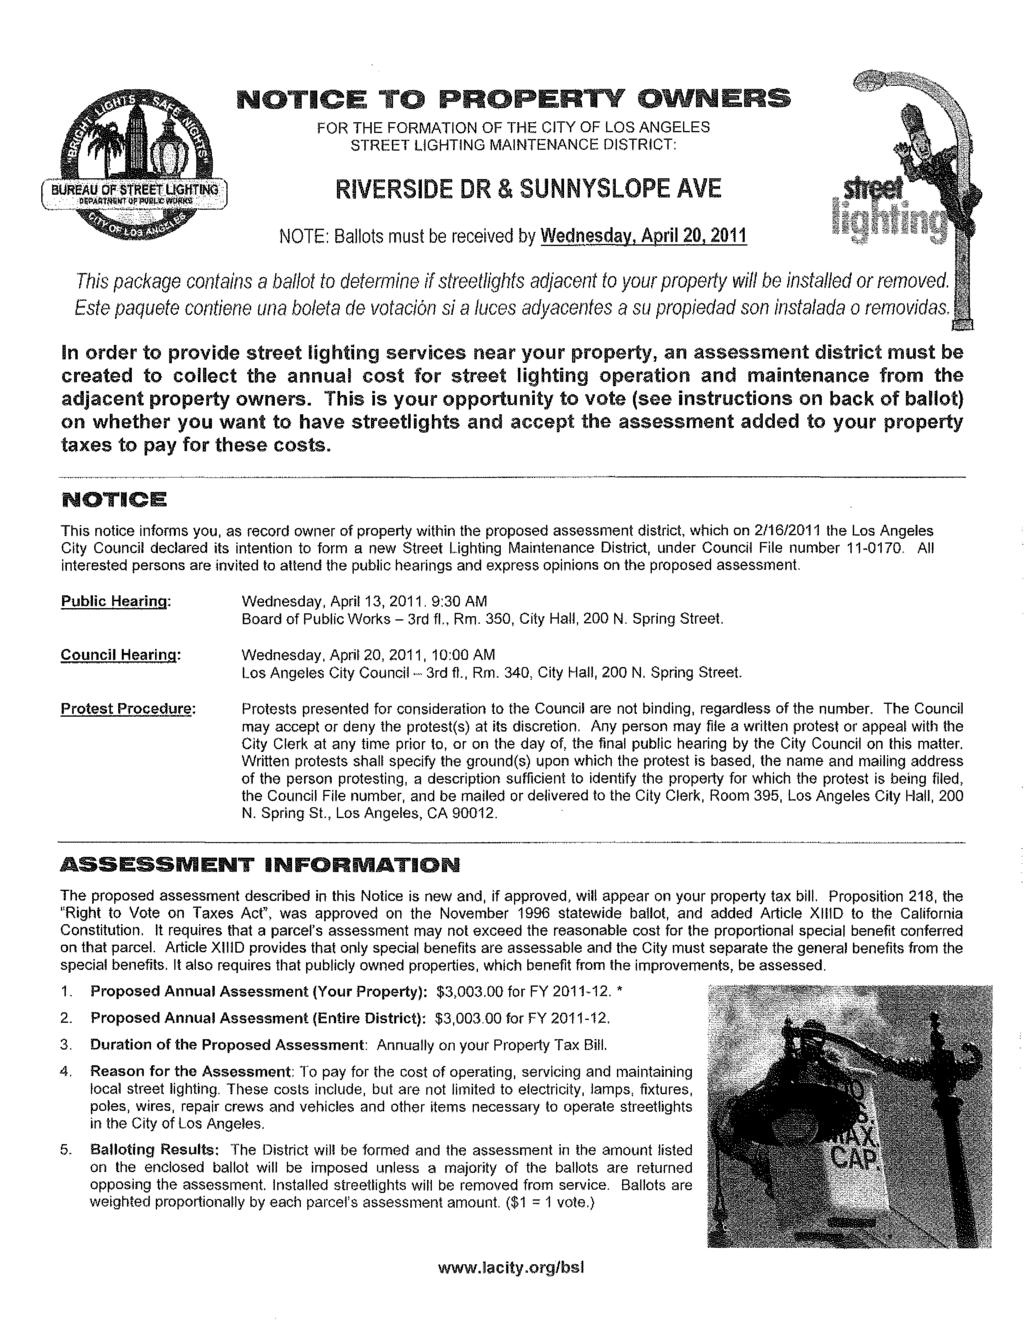 NOTICE TO PROPERTY OWNERS FOR THE FORMATION OF THE CITY OF LOS ANGELES STREET LIGHTING MAINTENANCE DISTRICT: RIVERSIDE DR & SUNNYSLOPE AVE NOTE: Ballots must be received by Wednesday, April20, 2011